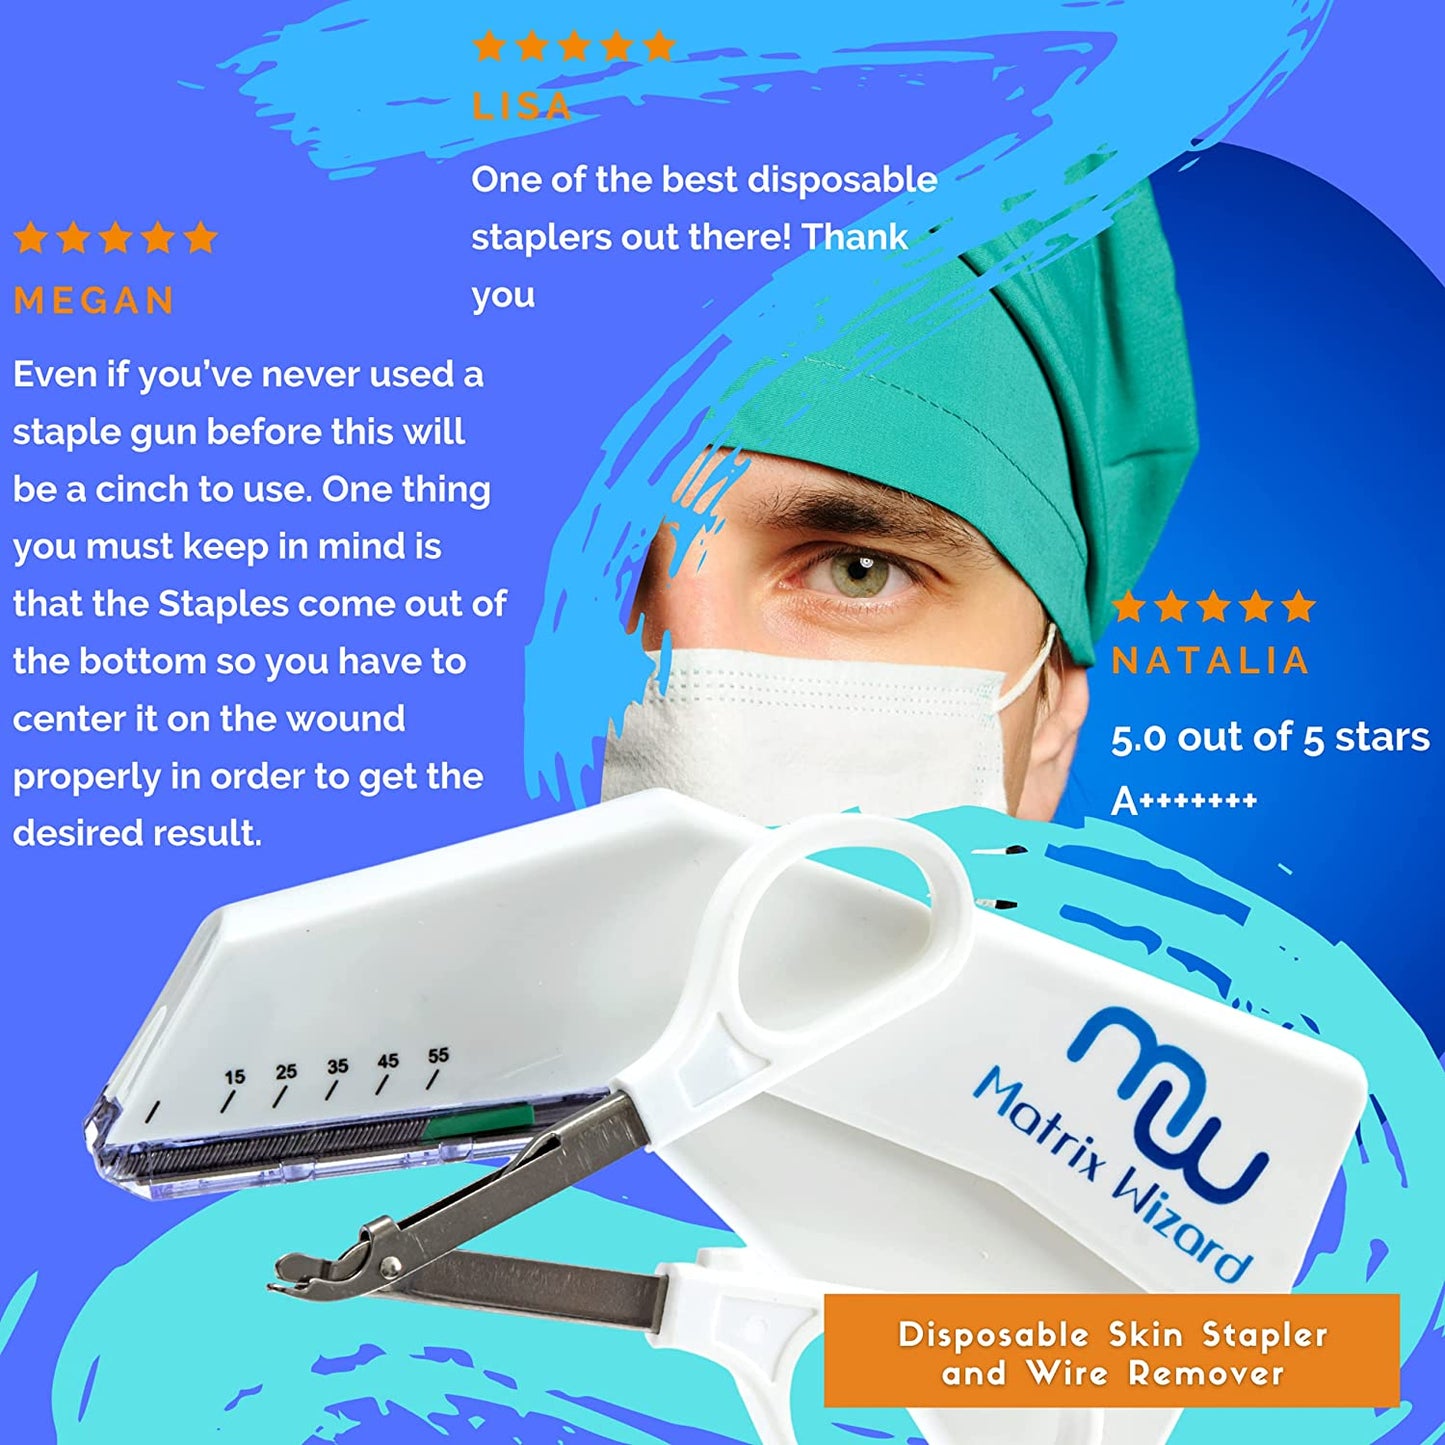 Disposable Skin Stapler (Suture Thread Alternative) with 55 Preloaded Wires Plus Stapler Remover Tool for Suture Training with Silicone Dummies, Clinical Rotation Practice, Veterinary Use